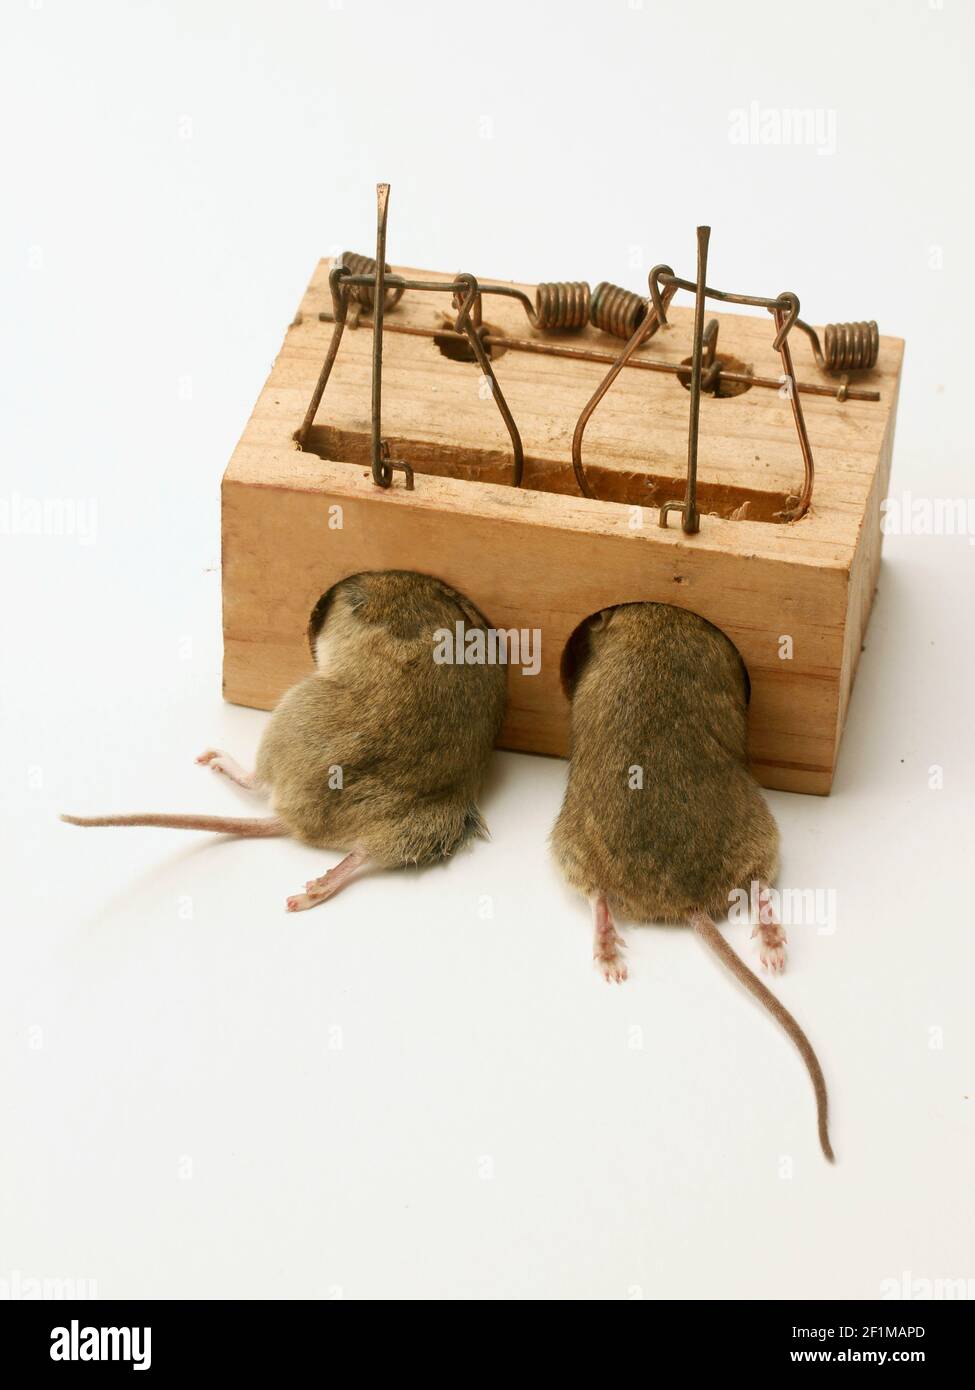 https://c8.alamy.com/comp/2F1MAPD/mousetrap-with-mice-2F1MAPD.jpg